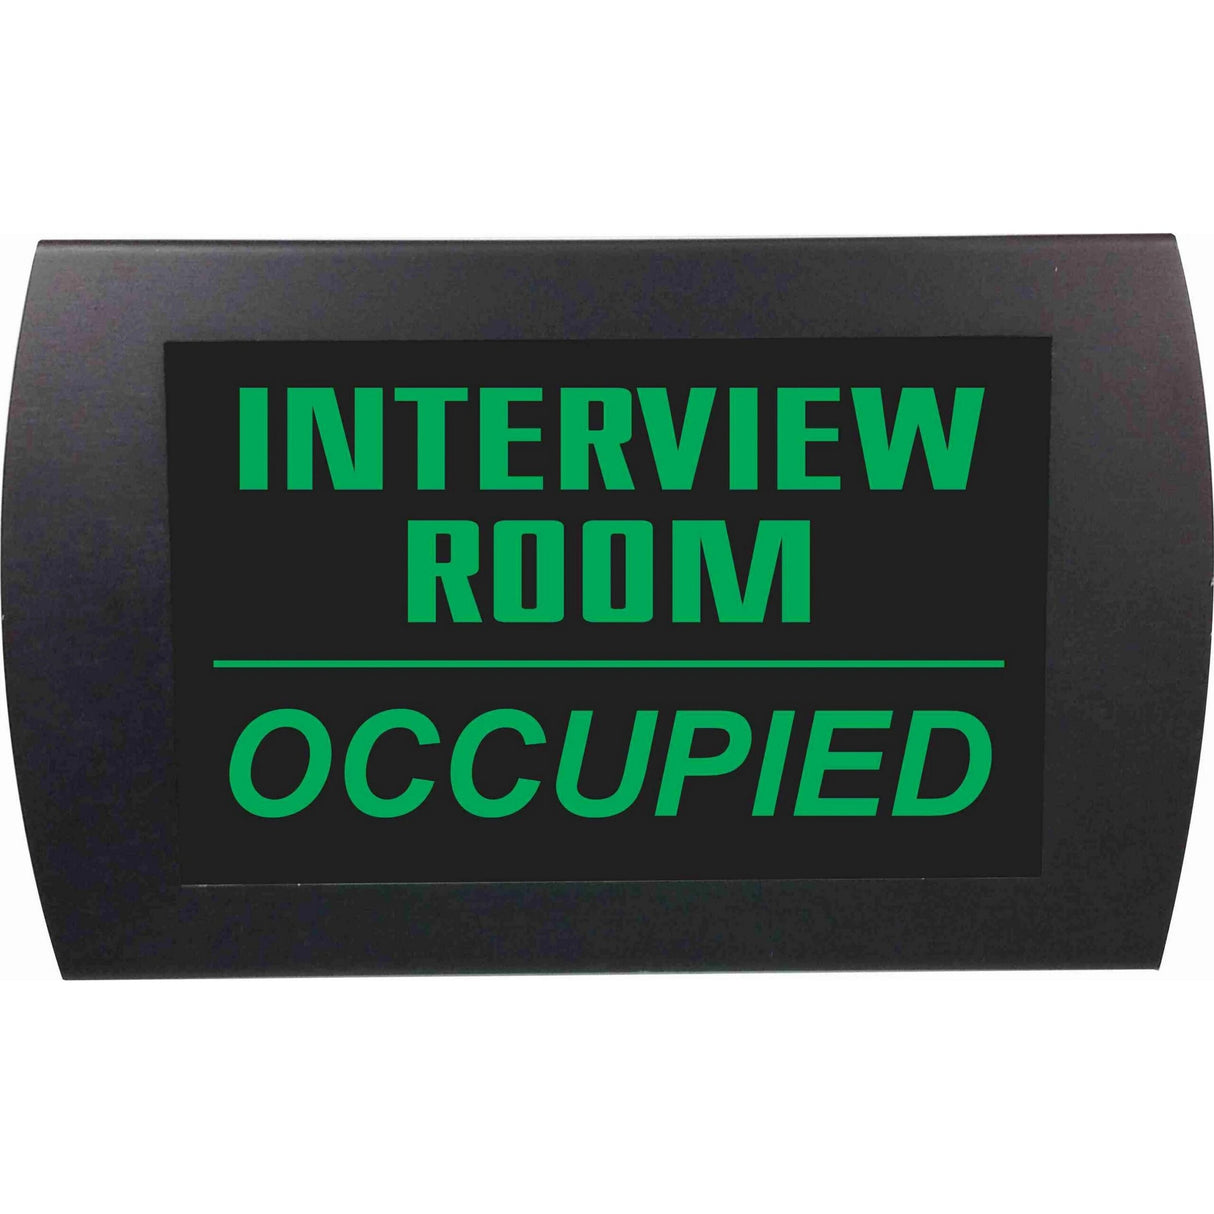 American Recorder Technologies OAS-2055M "INTERVIEW ROOM OCCUPIED" LED Lighted Sign, Green